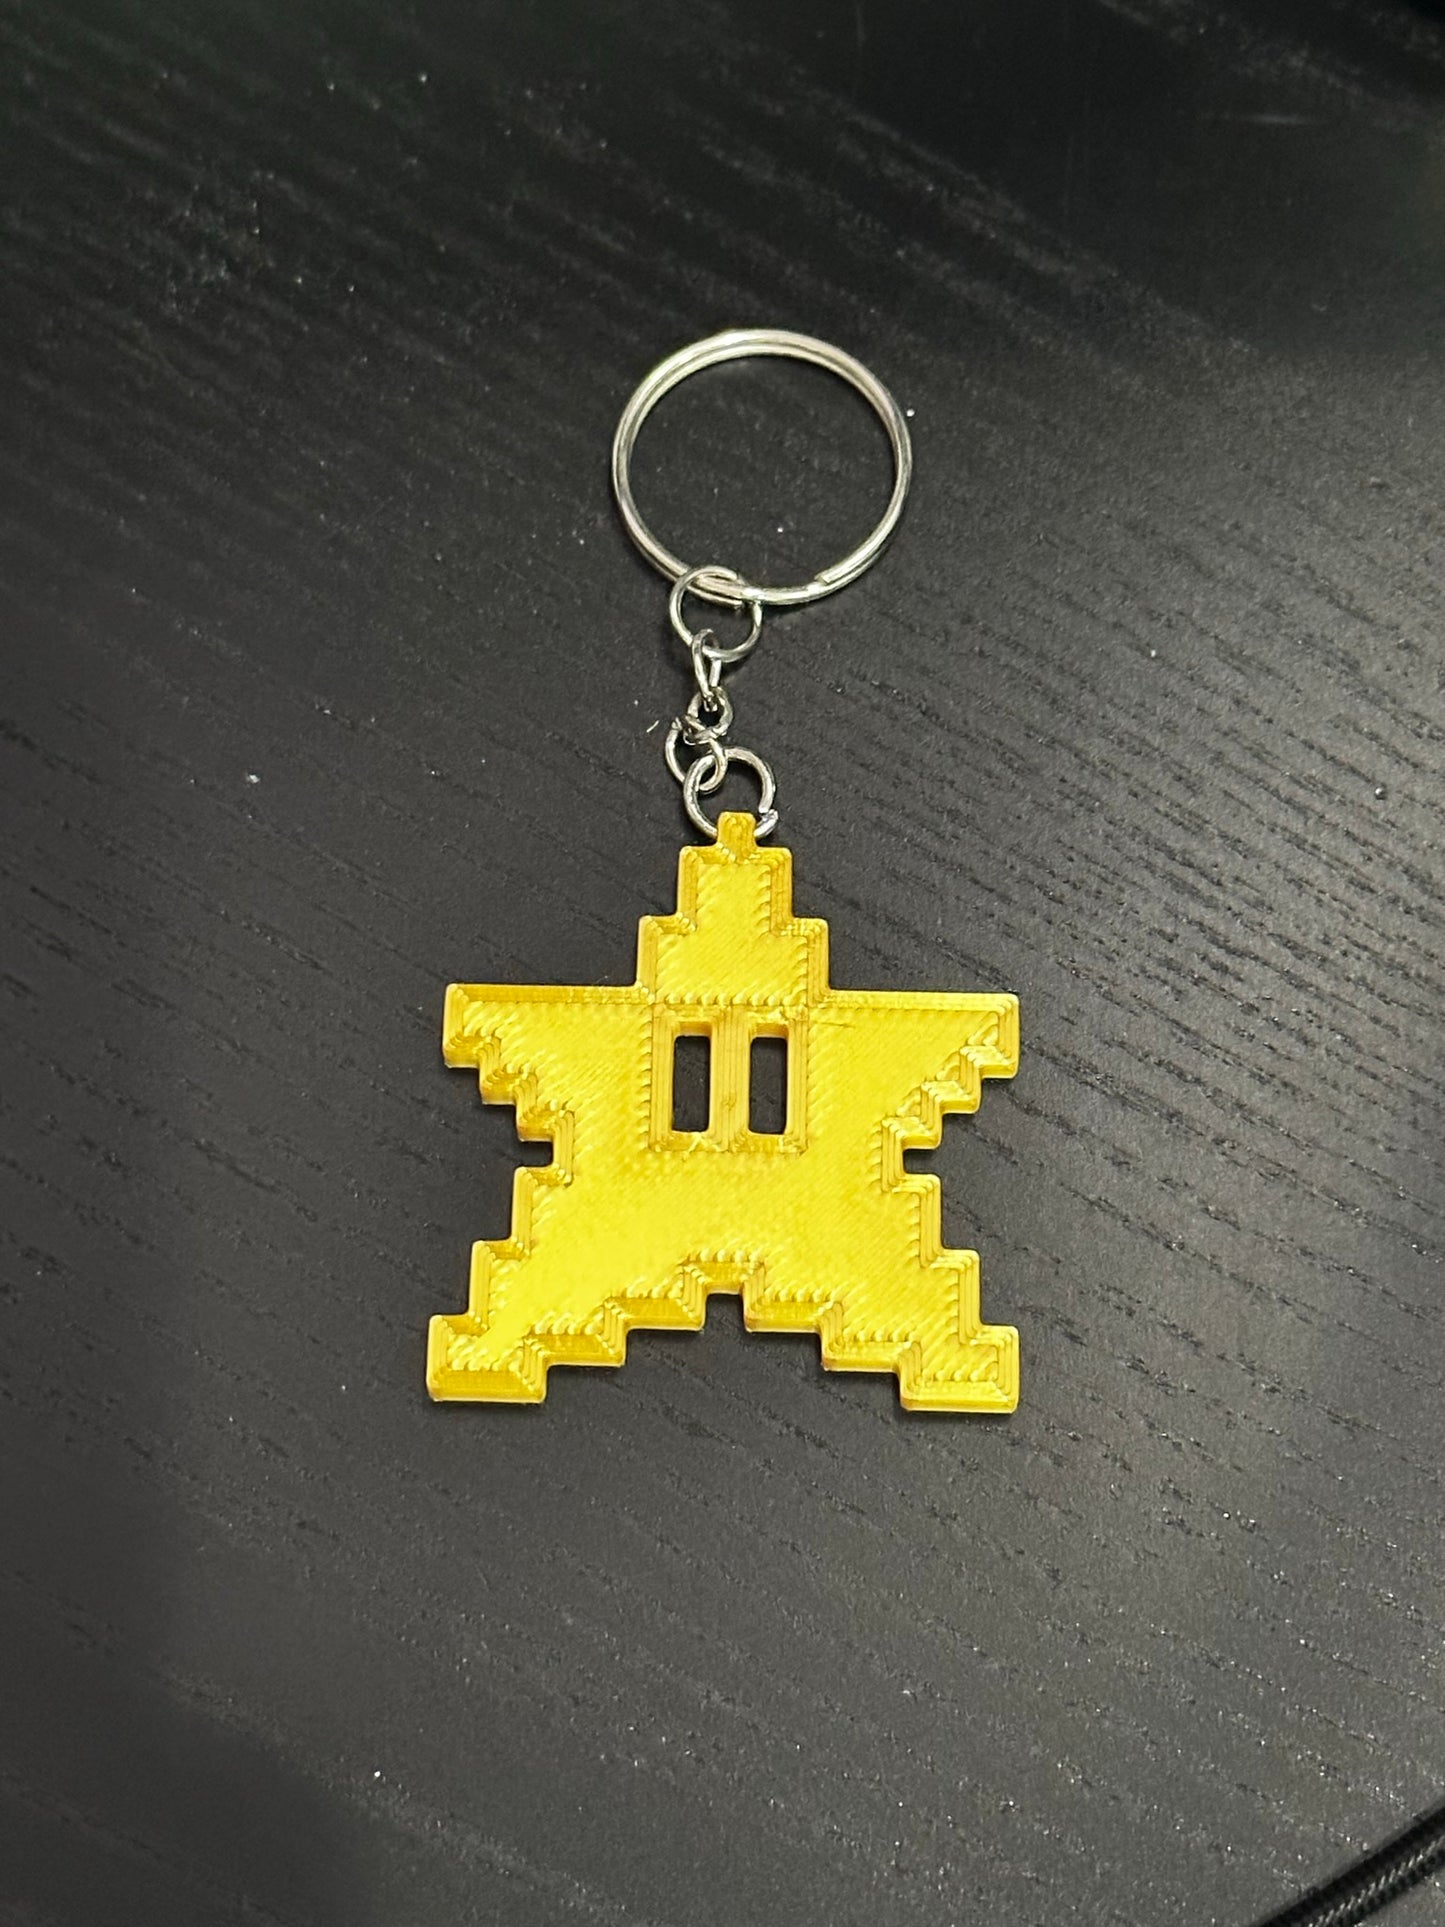 Super Mario Brothers Yellow Star Keychain - Handmade Keyring Inspired by the Iconic Movie